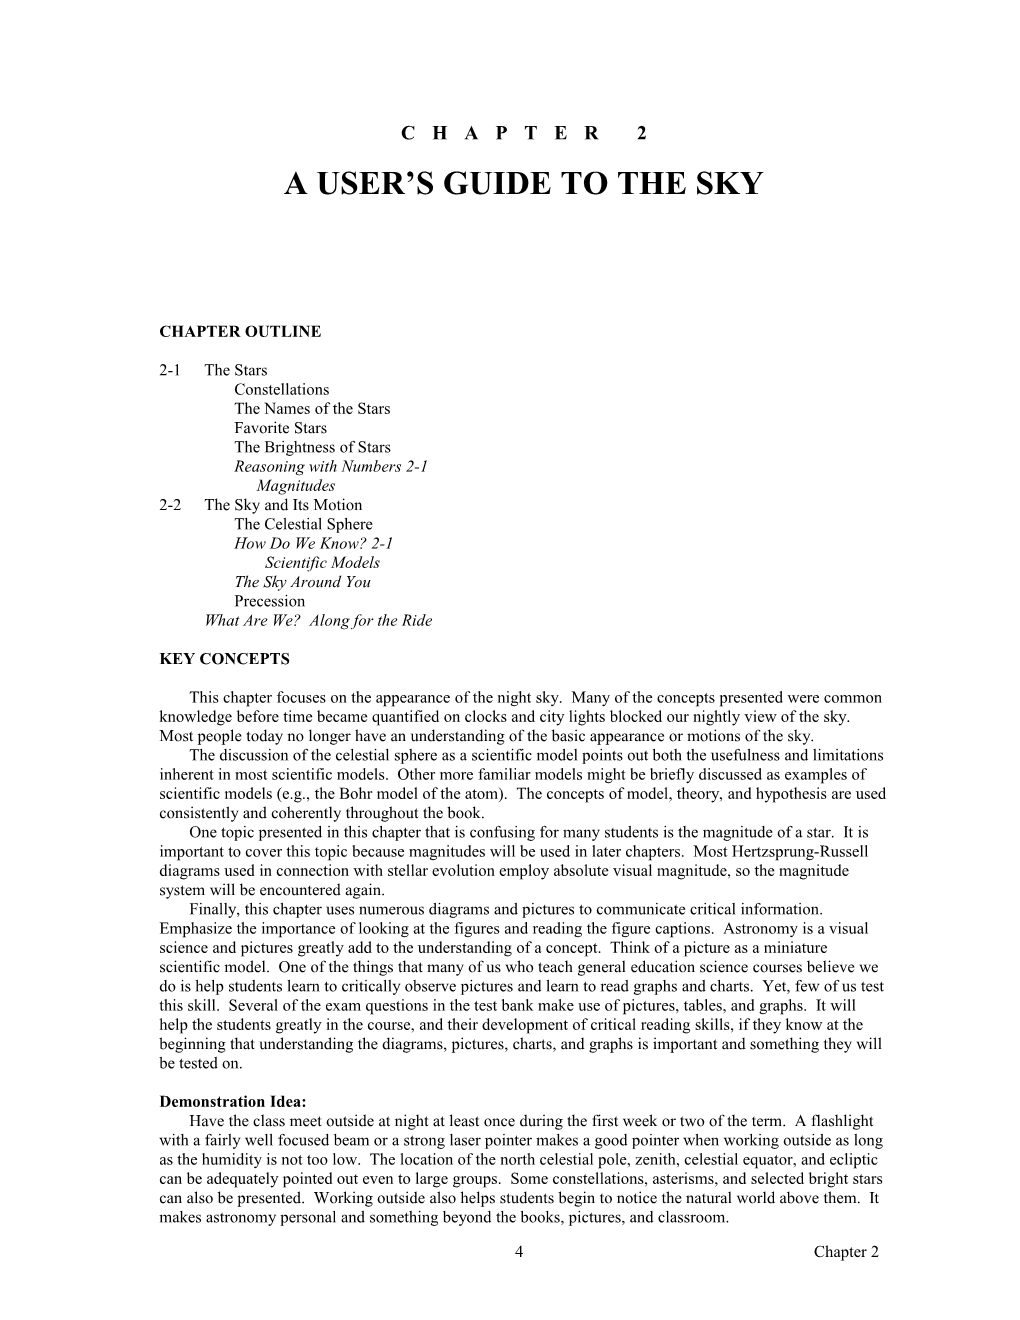 A User S Guide to the Sky